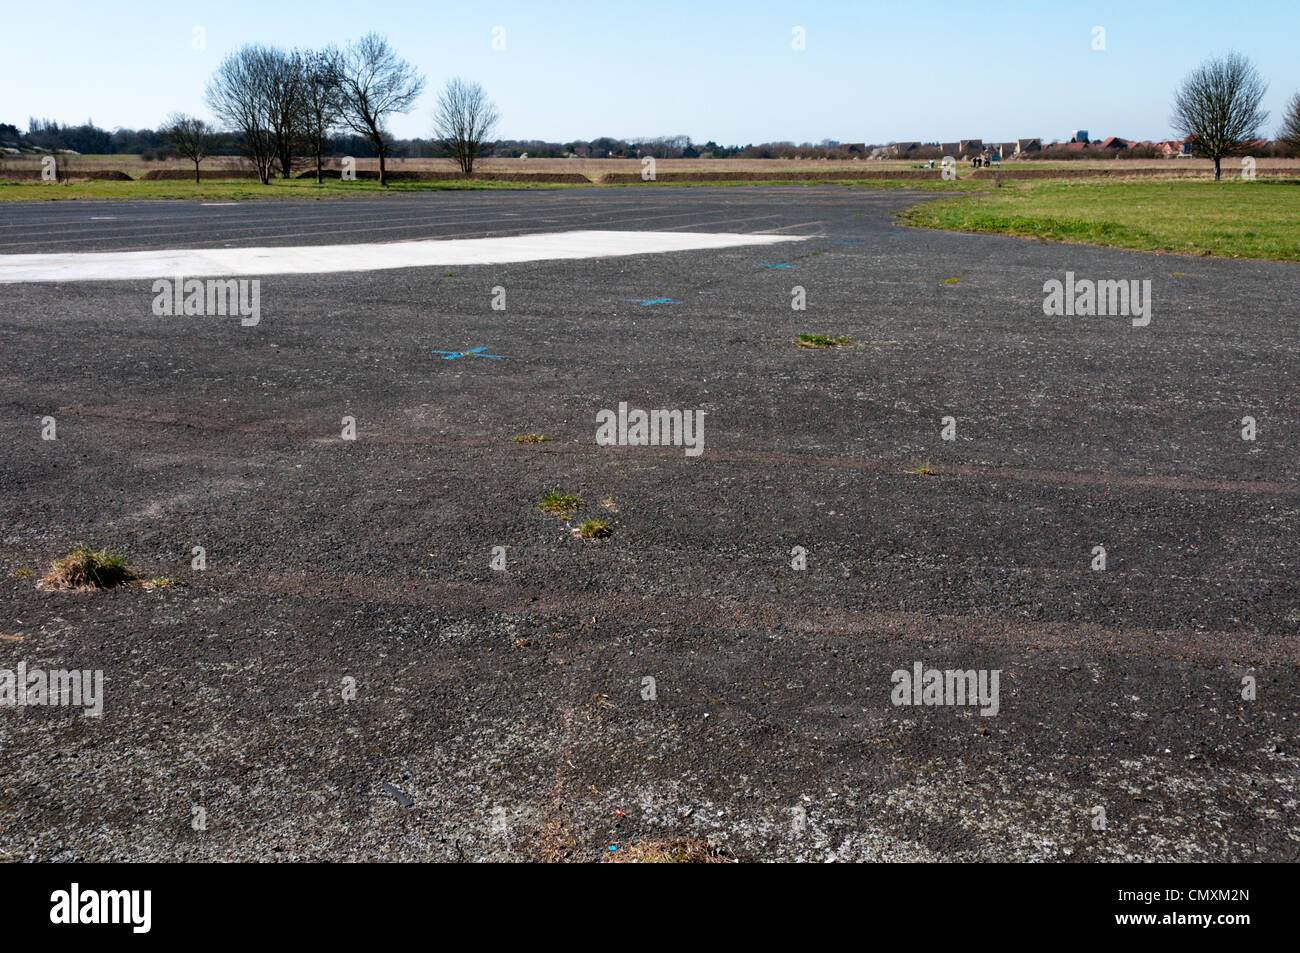 This area of tarmac is all that is left of the runways of the old Croydon Aerodrome in Roundshaw Park. SEE DESC FOR DETAILS. Stock Photo